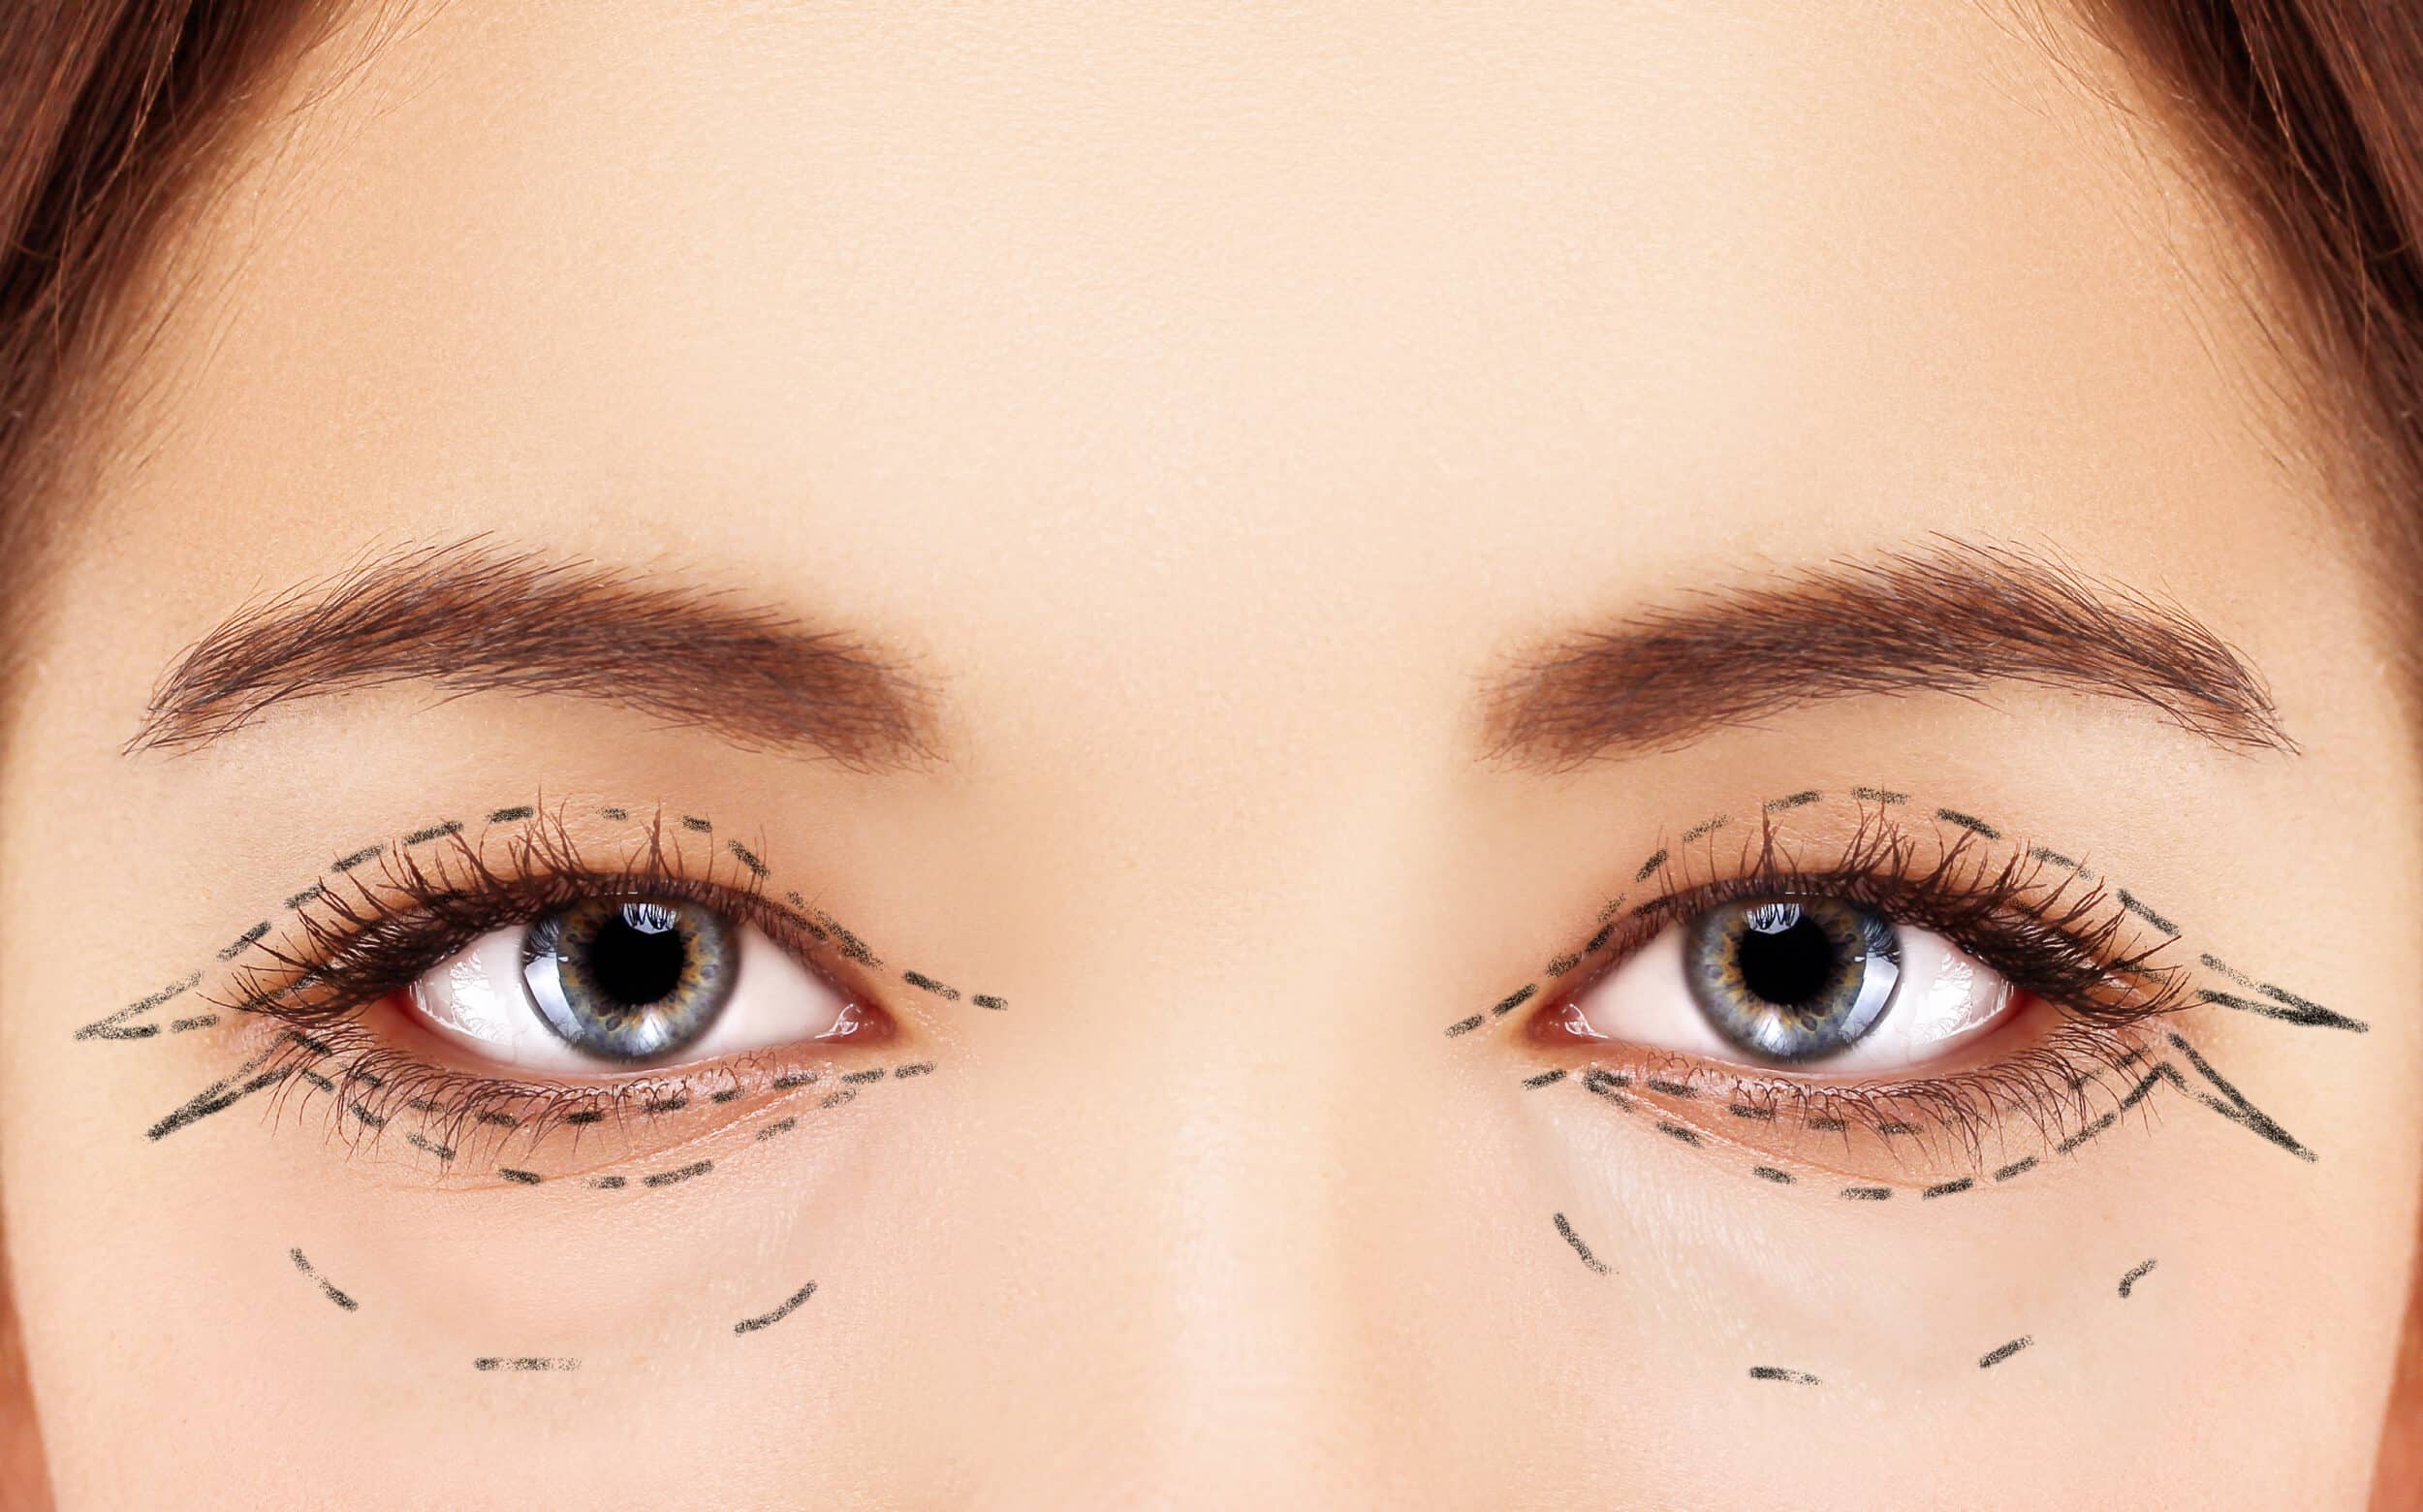 Lower Blepharoplasty.Upper blepharoplasty.Marking the face.Perforation lines on females face, plastic surgery concept.